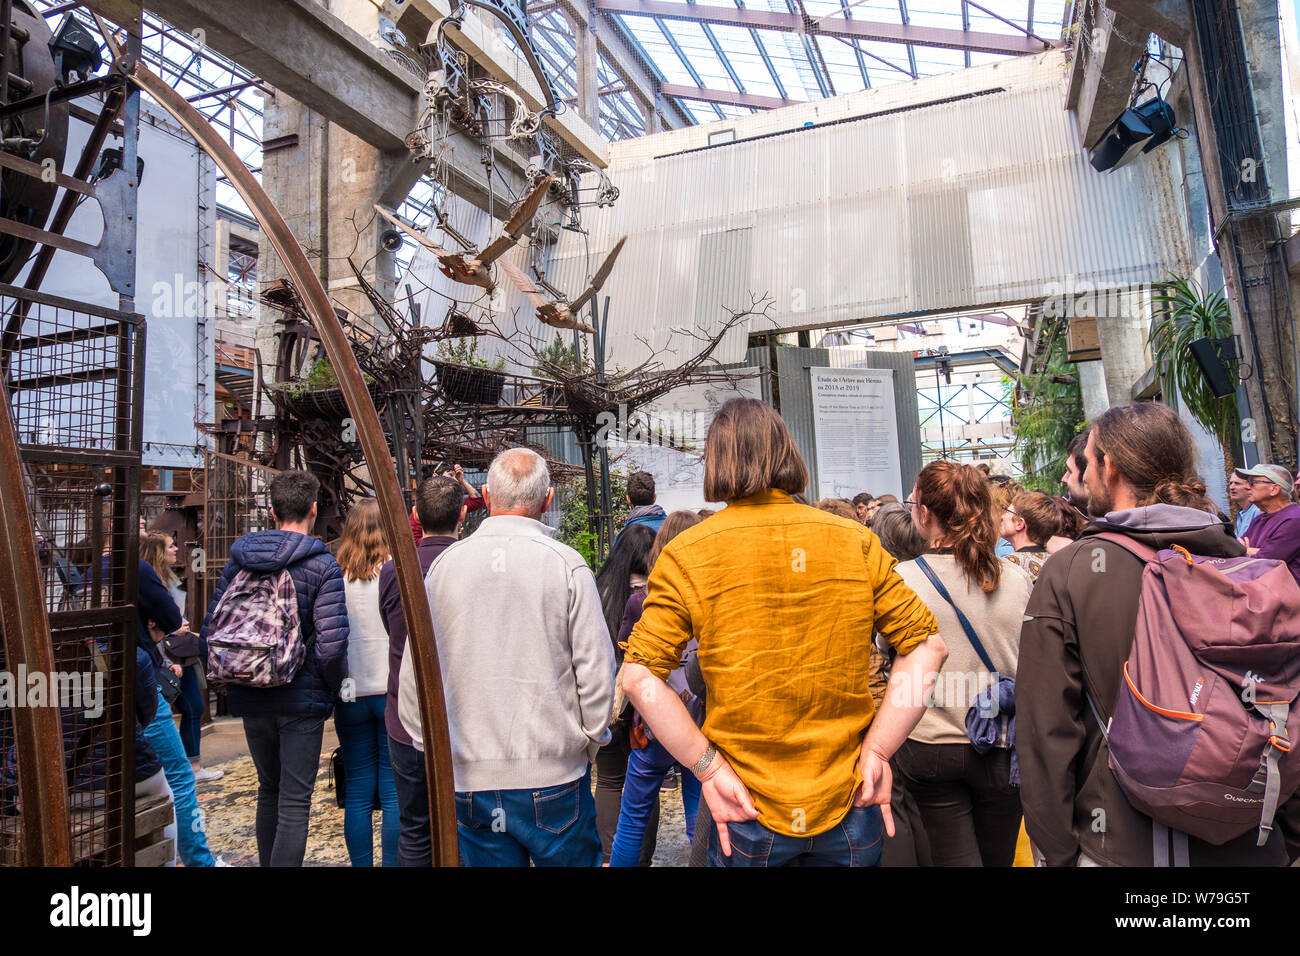 Nantes, France - May 12, 2019: Tourists get acquainted with the exhibits the Hangar des Machines is part of the Machines of the Isle of Nantes, France Stock Photo